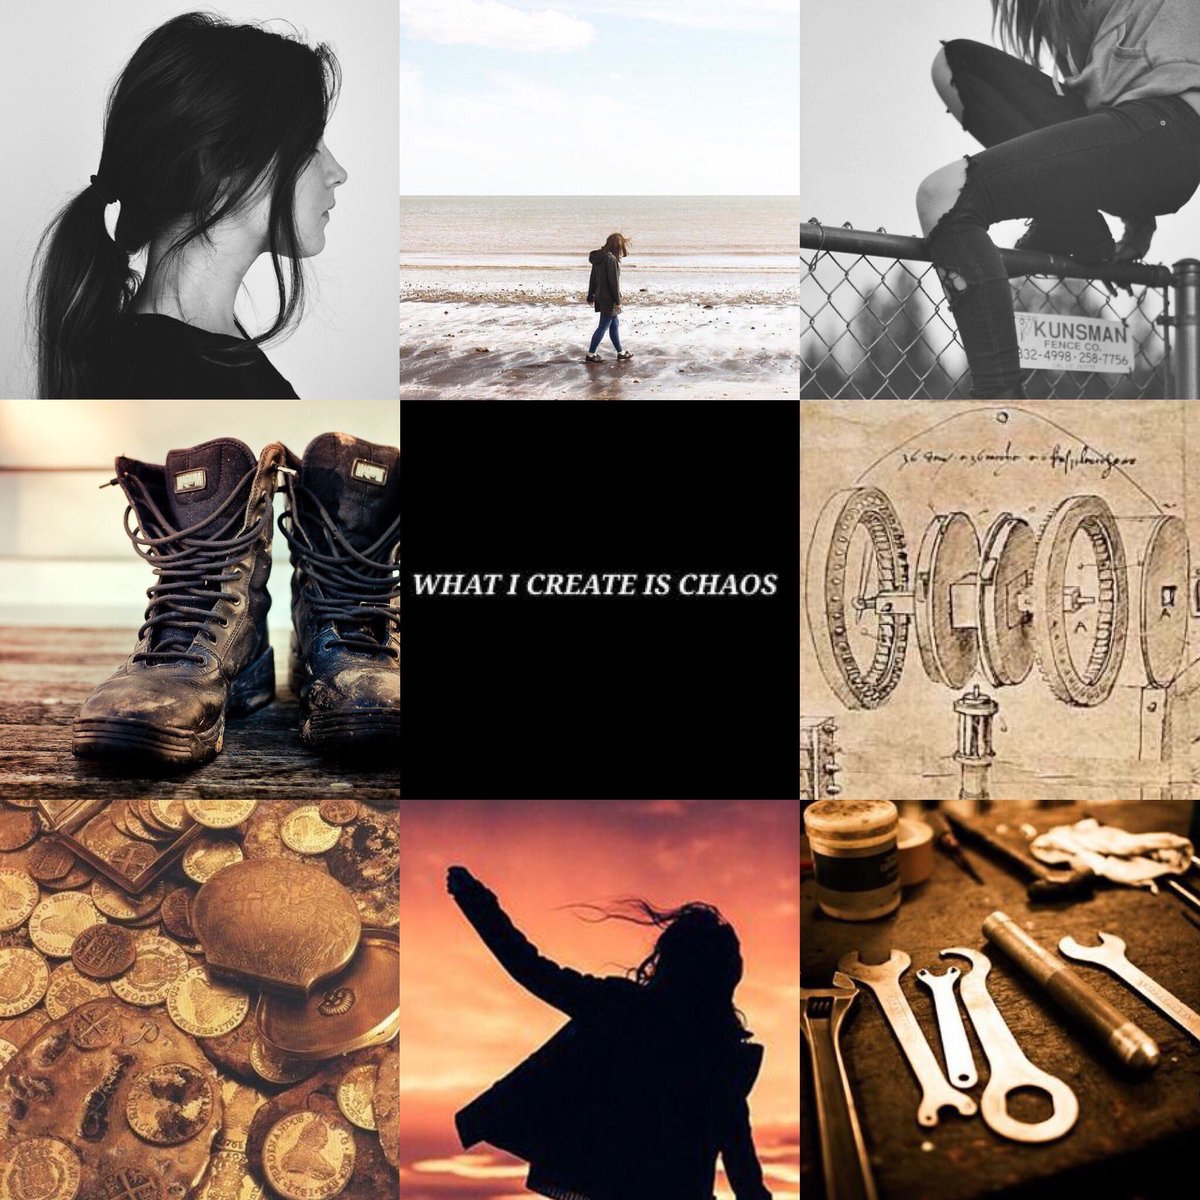 Took some chill time and went diving thru Pinterest. Moodboards for 2 upcoming characters